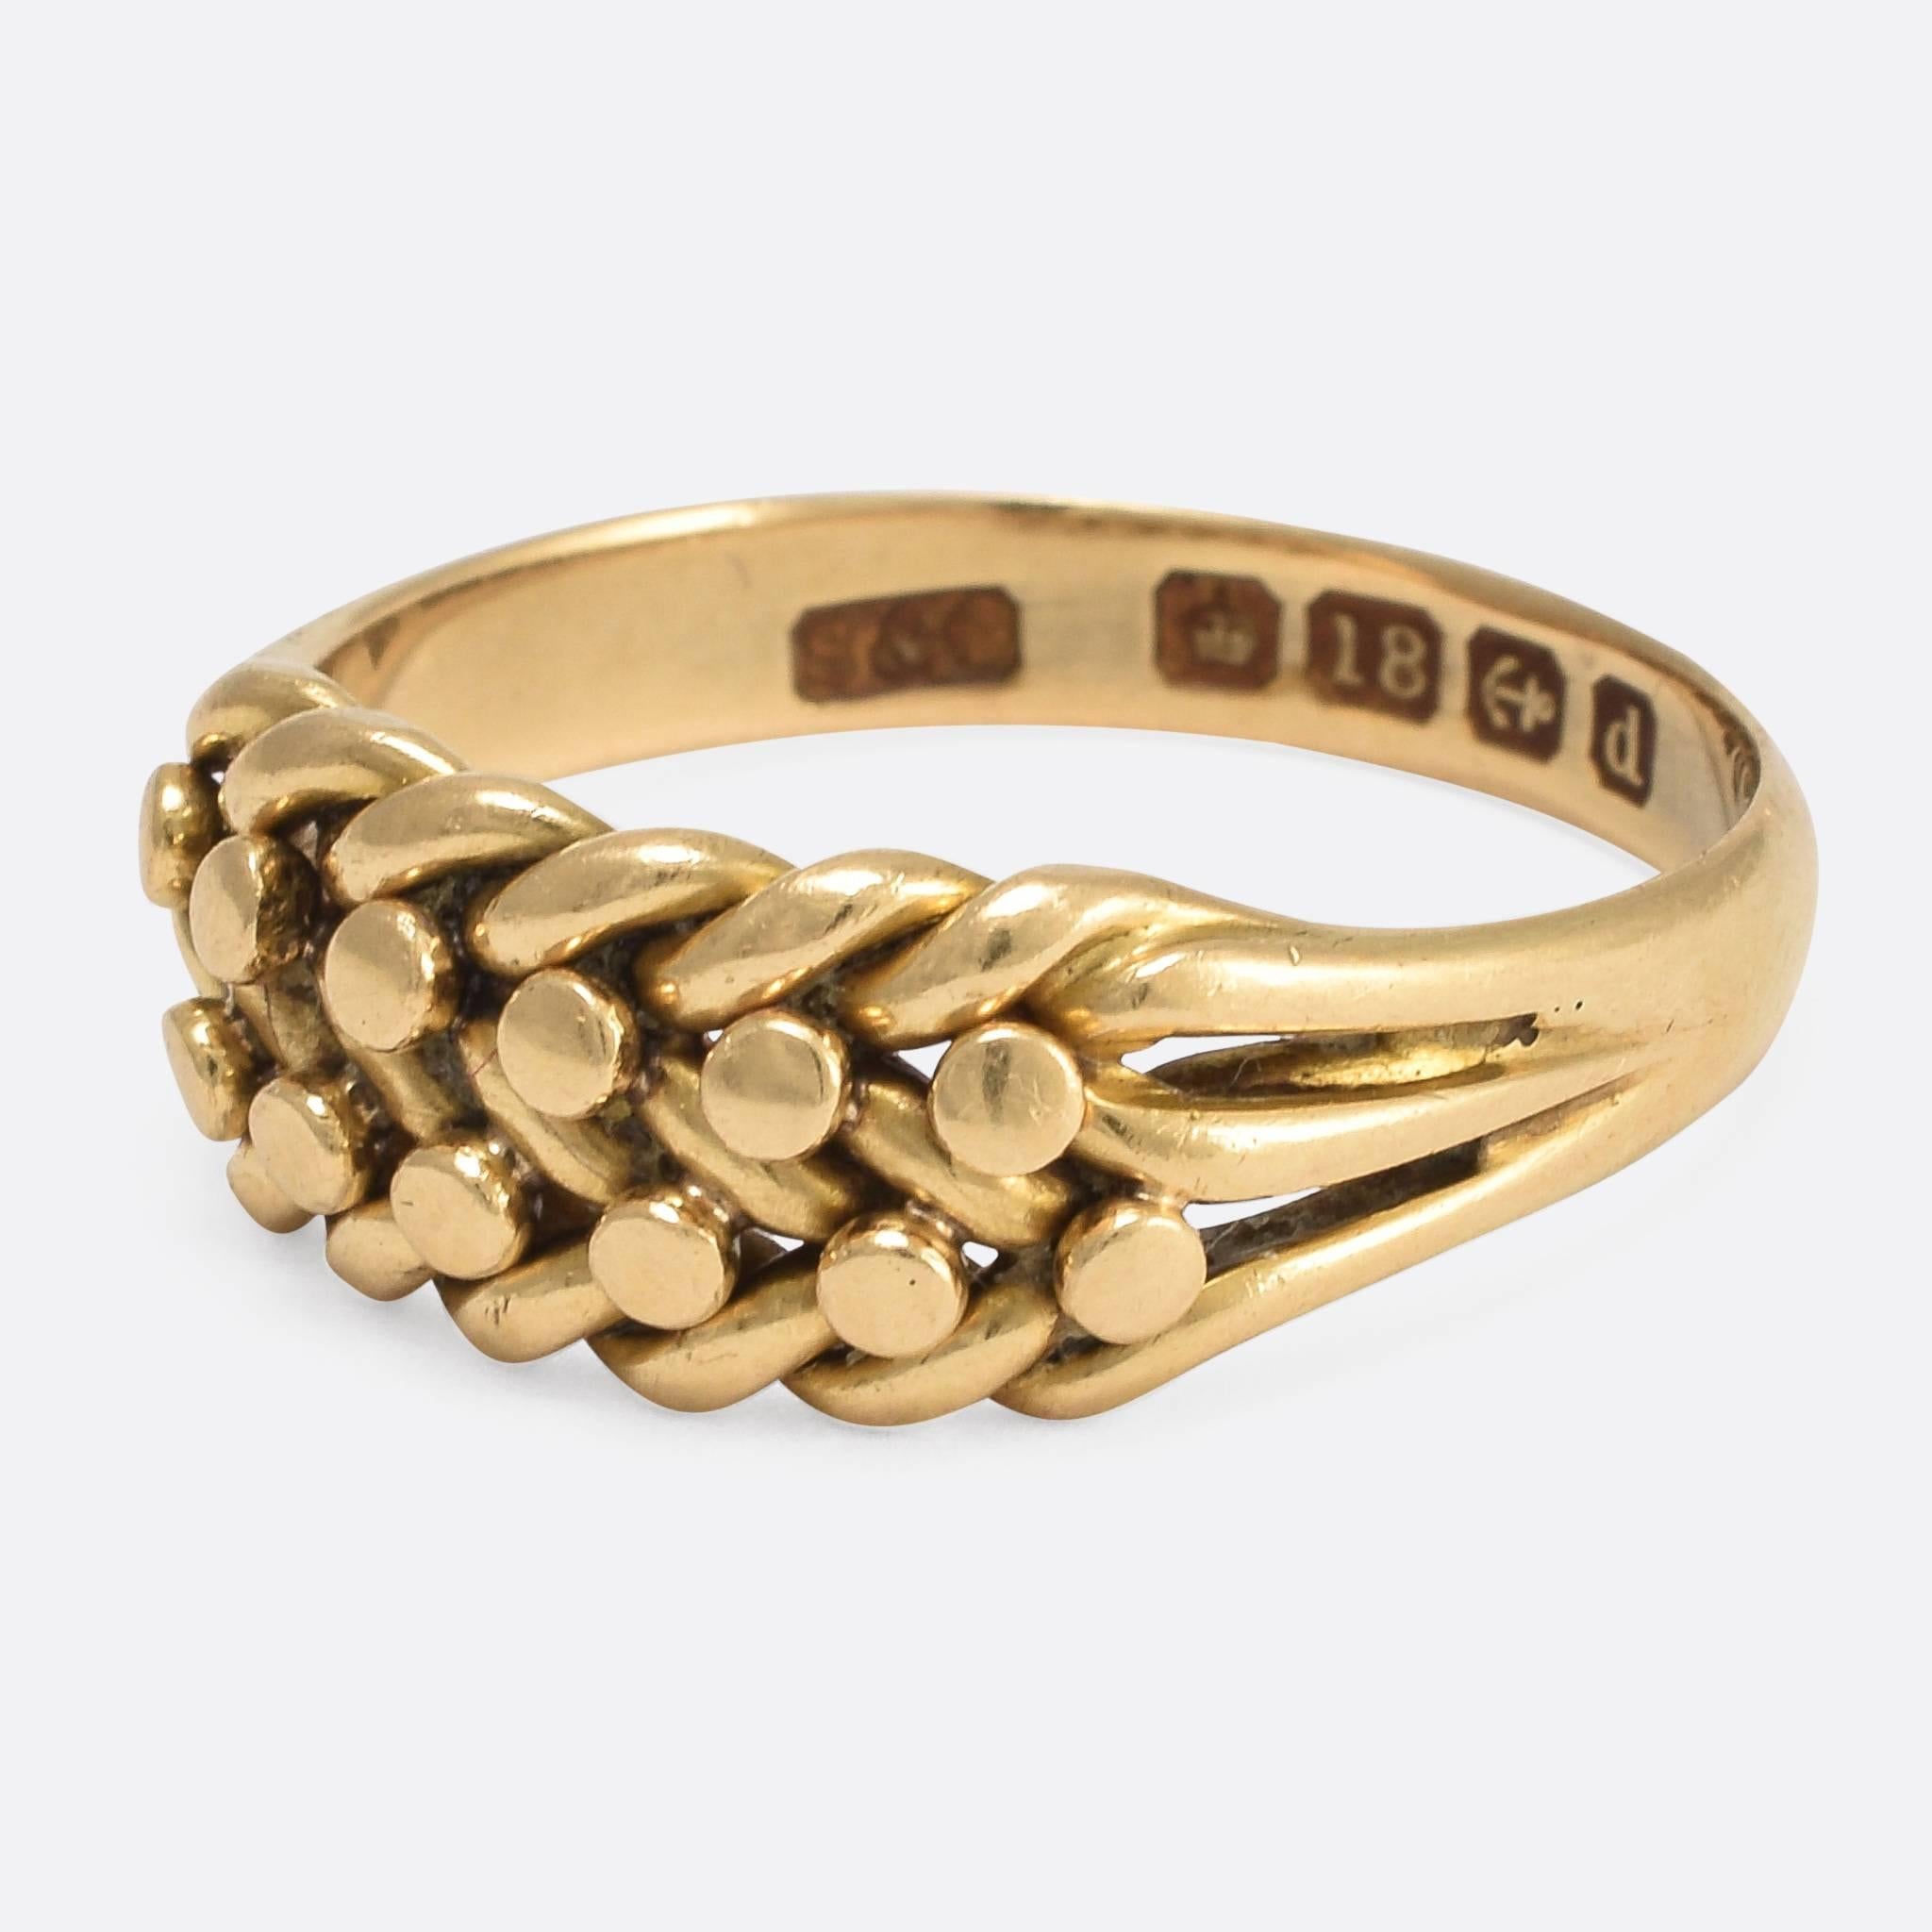 This elegant braided keeper ring dates to the very early 20th Century, bearing clear English hallmarks for the year 1903. It's modelled in rich 18k gold, and has developed a beautiful antique patina of the last century. A particularly high quality